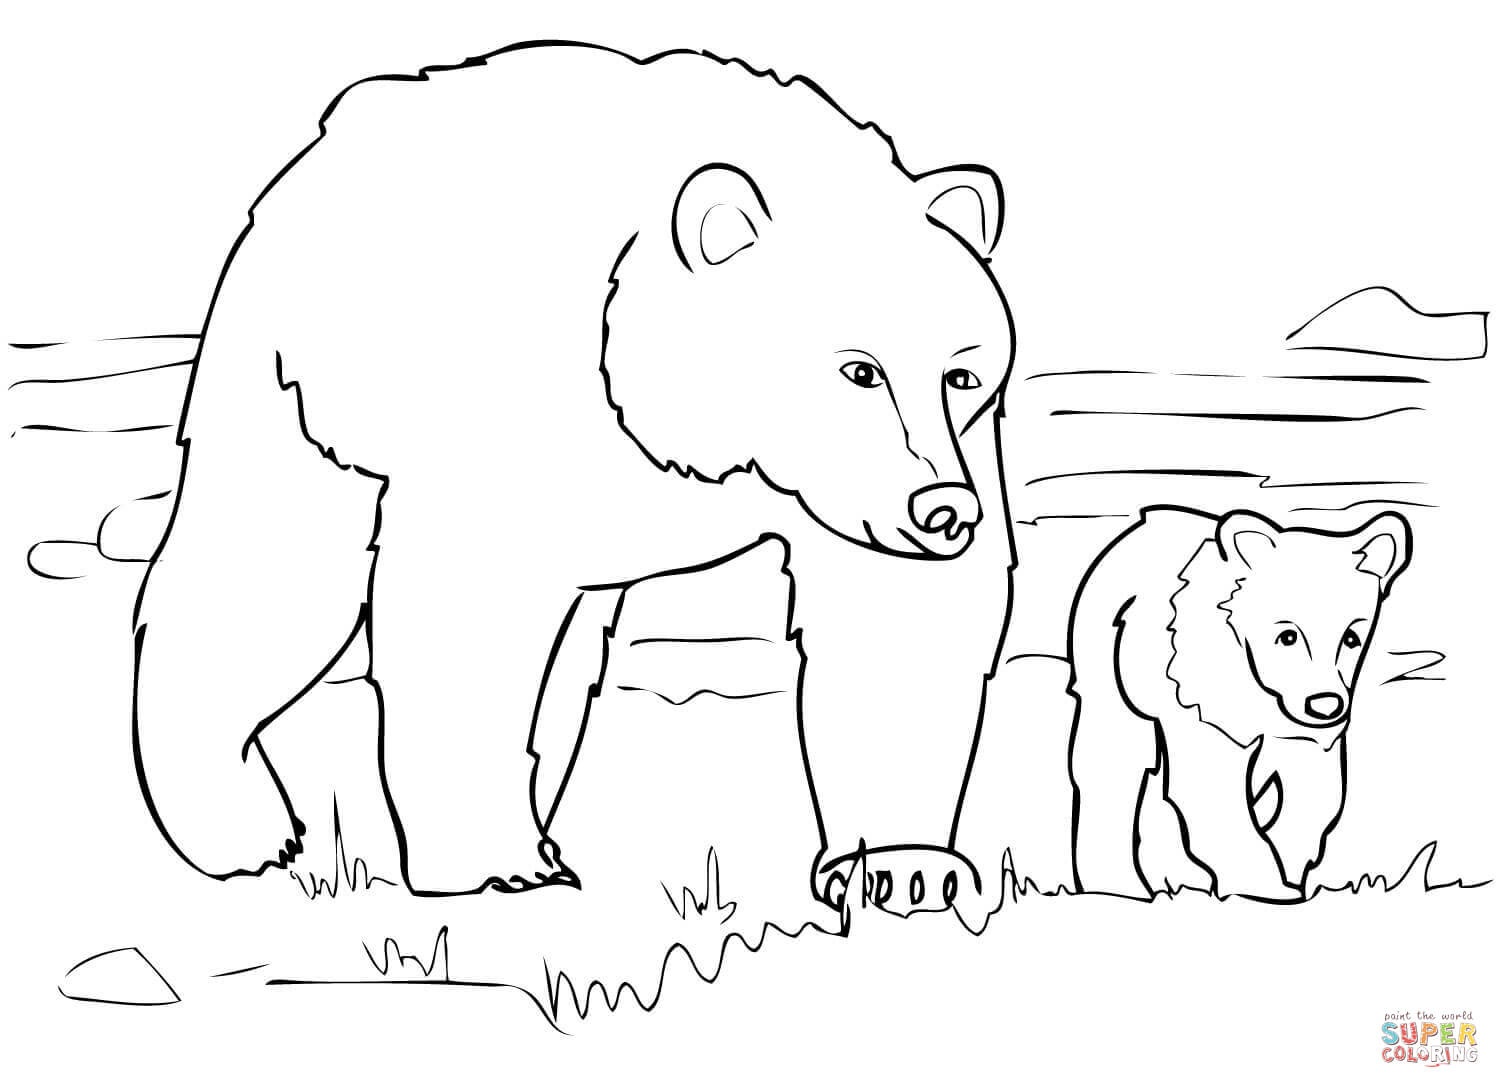 Grizzly Bear Family Coloring Page | Free Printable Coloring Pages - Polar Bear Printable Pictures Free